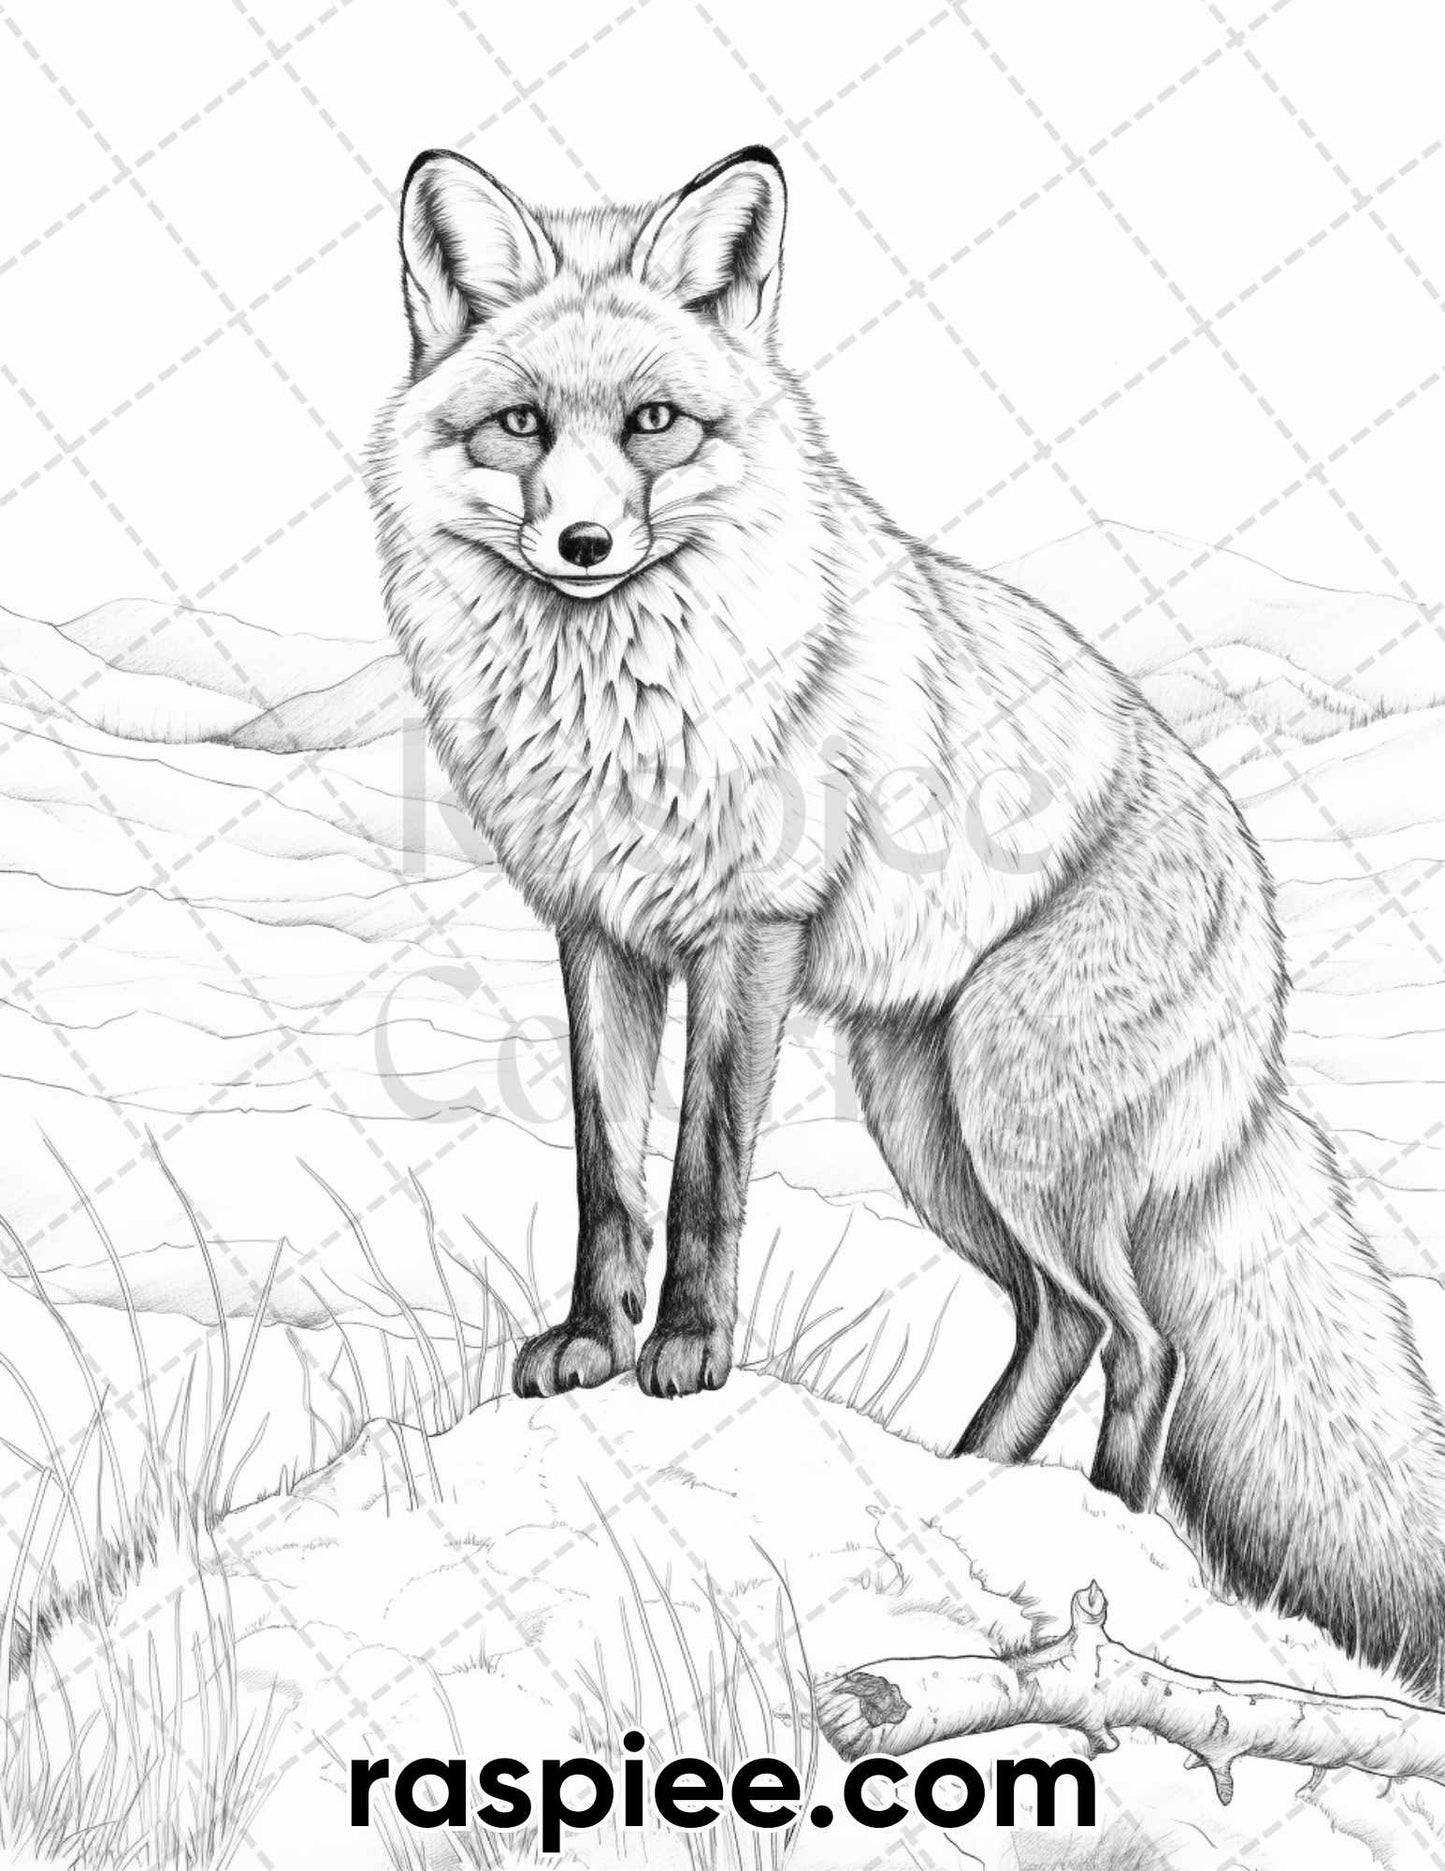 55 Winter Wildlife Grayscale Coloring Pages for Adults, Printable PDF Instant Download